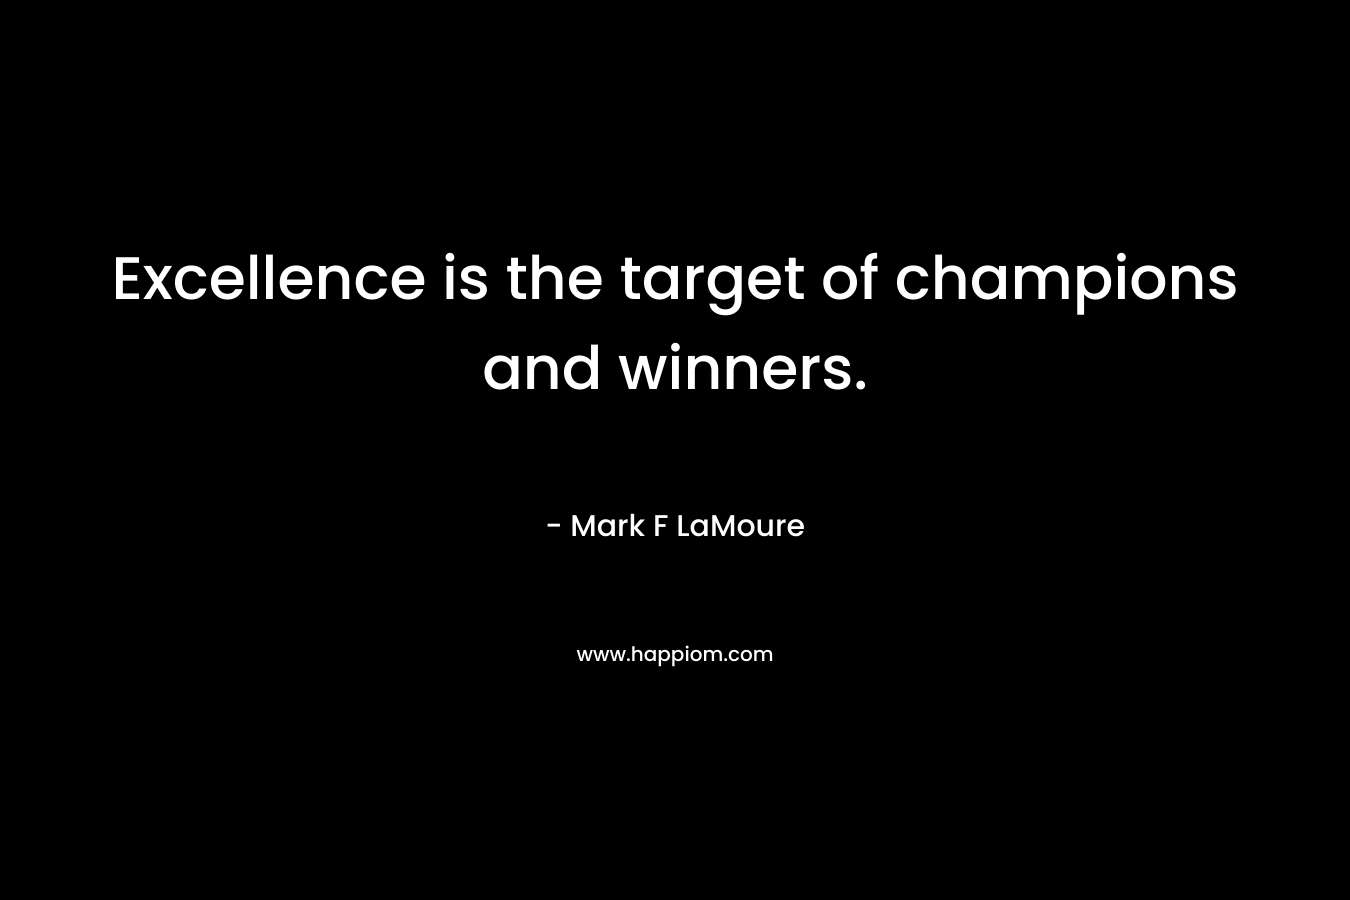 Excellence is the target of champions and winners.